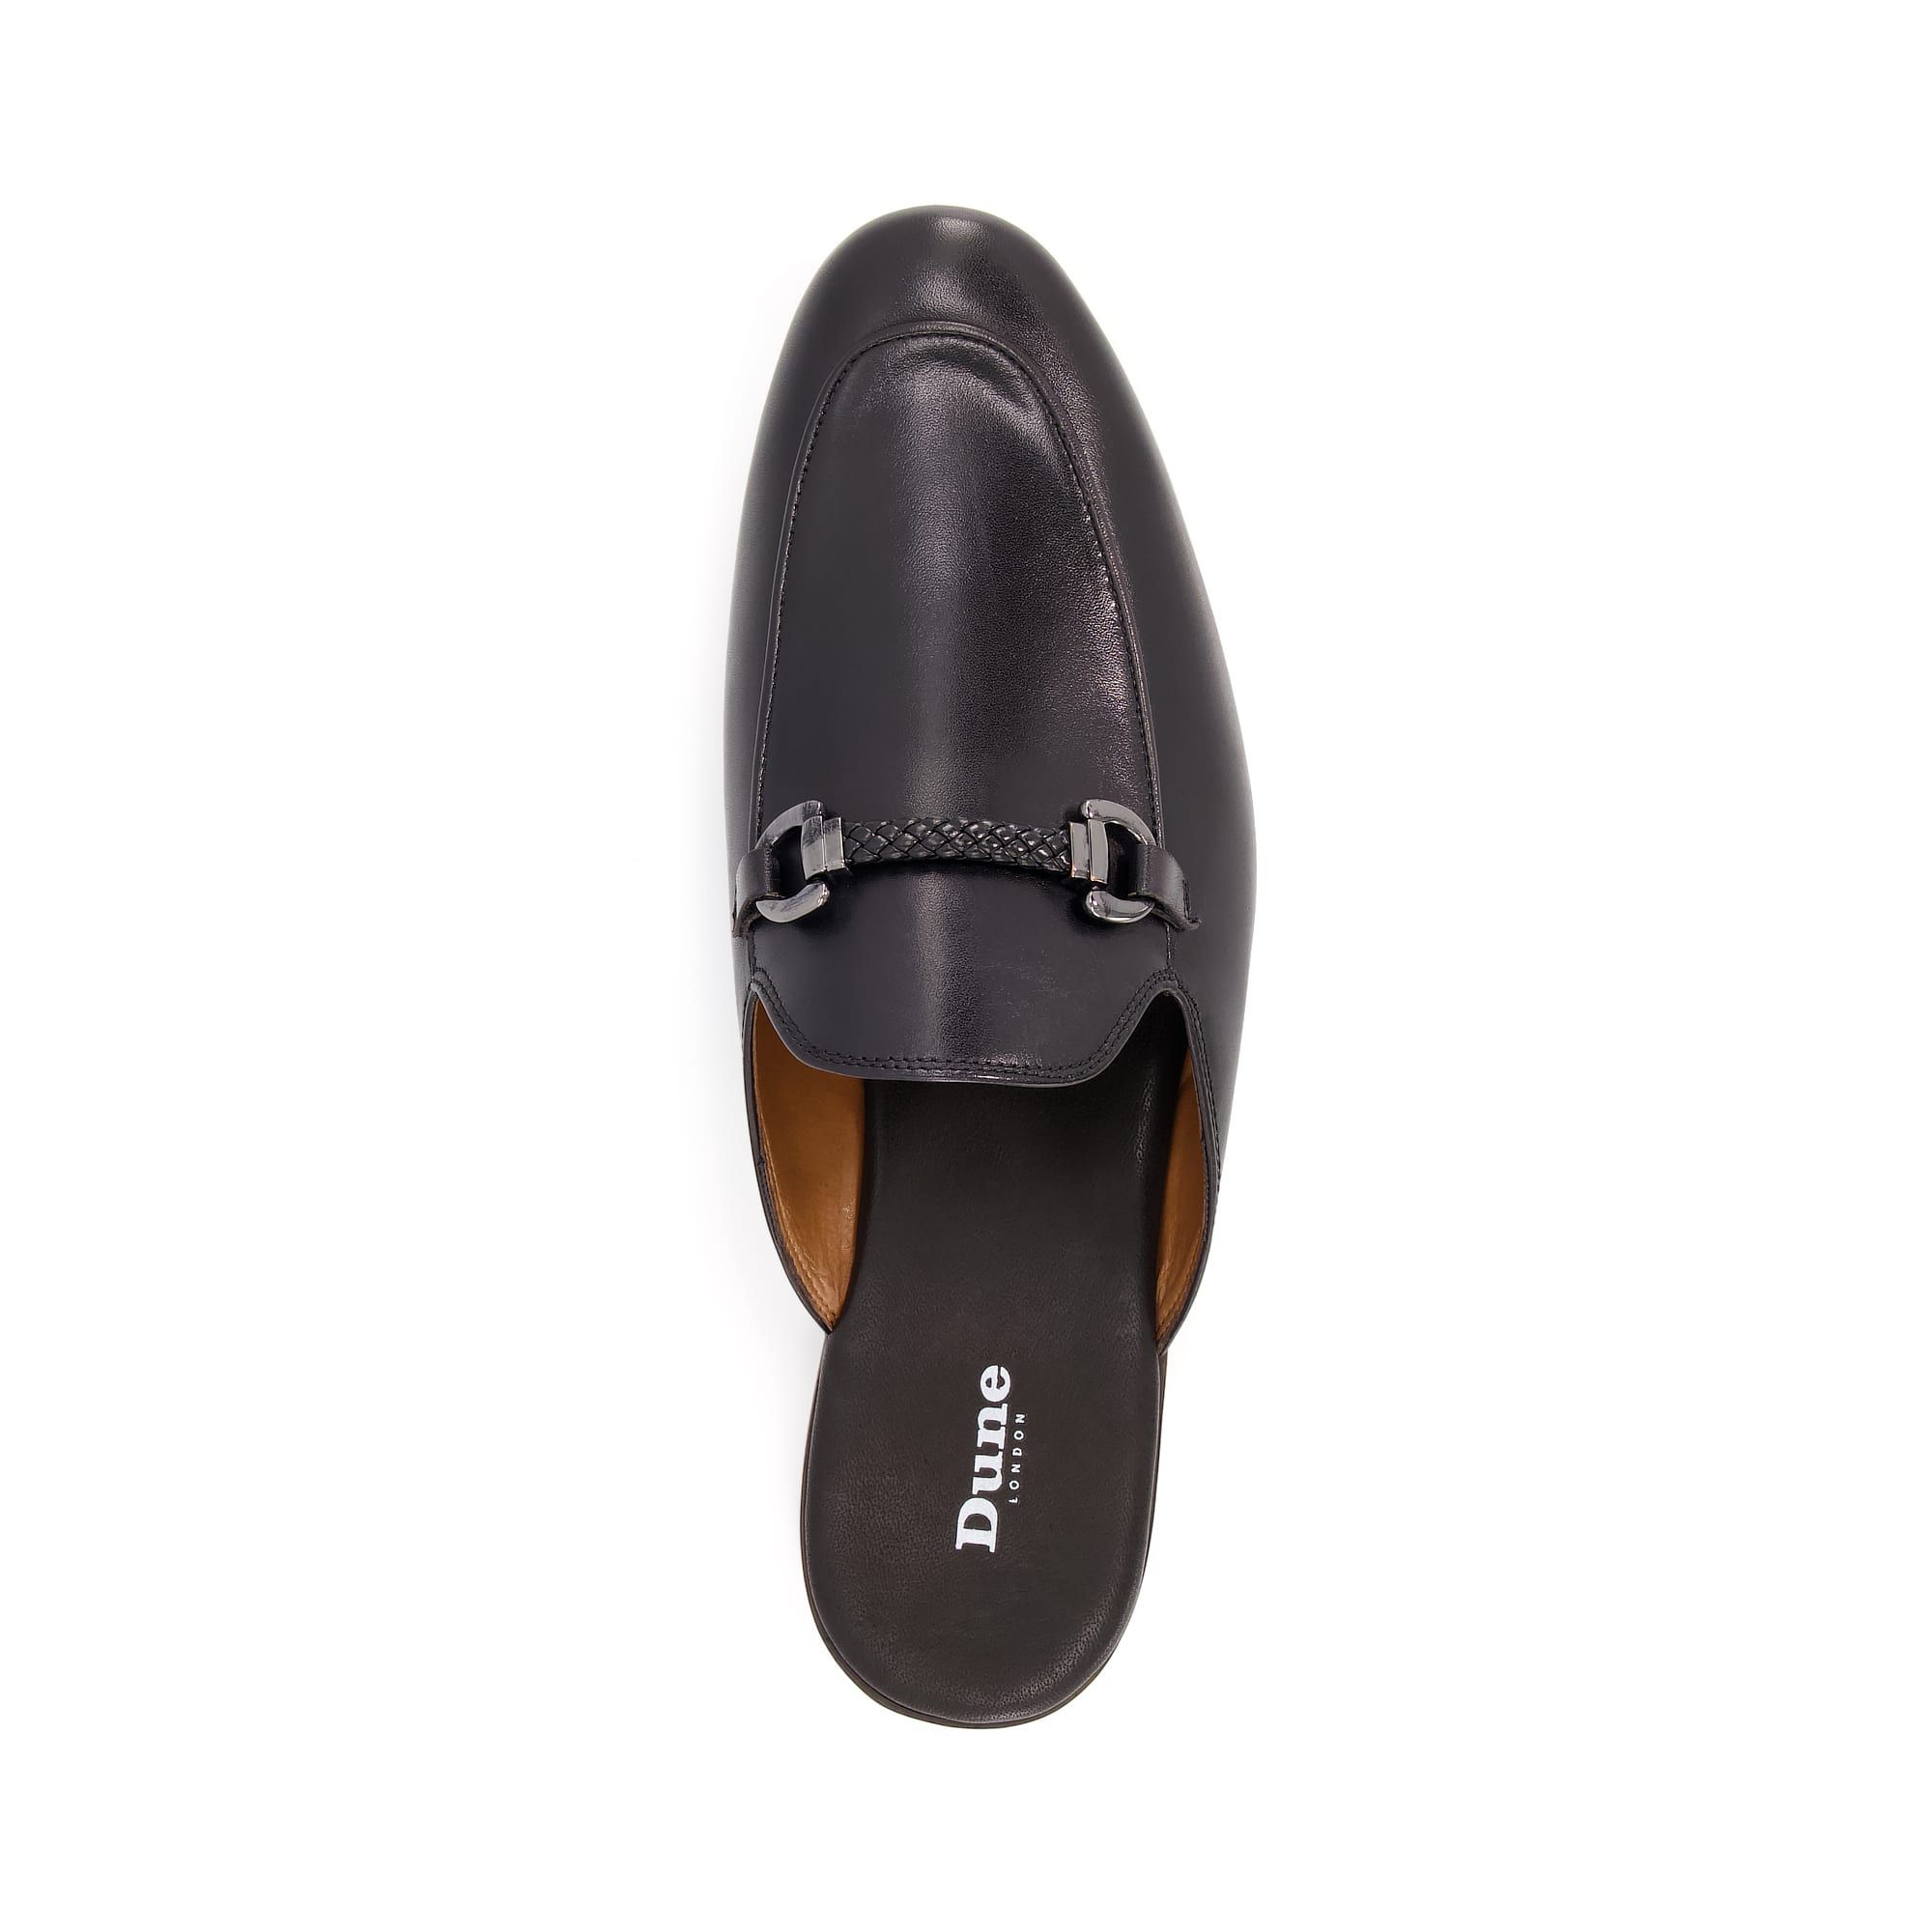 Upgrade your selection of suave footwear with these smart loafers. Their backless silhouette is both comfortable and on-trend.